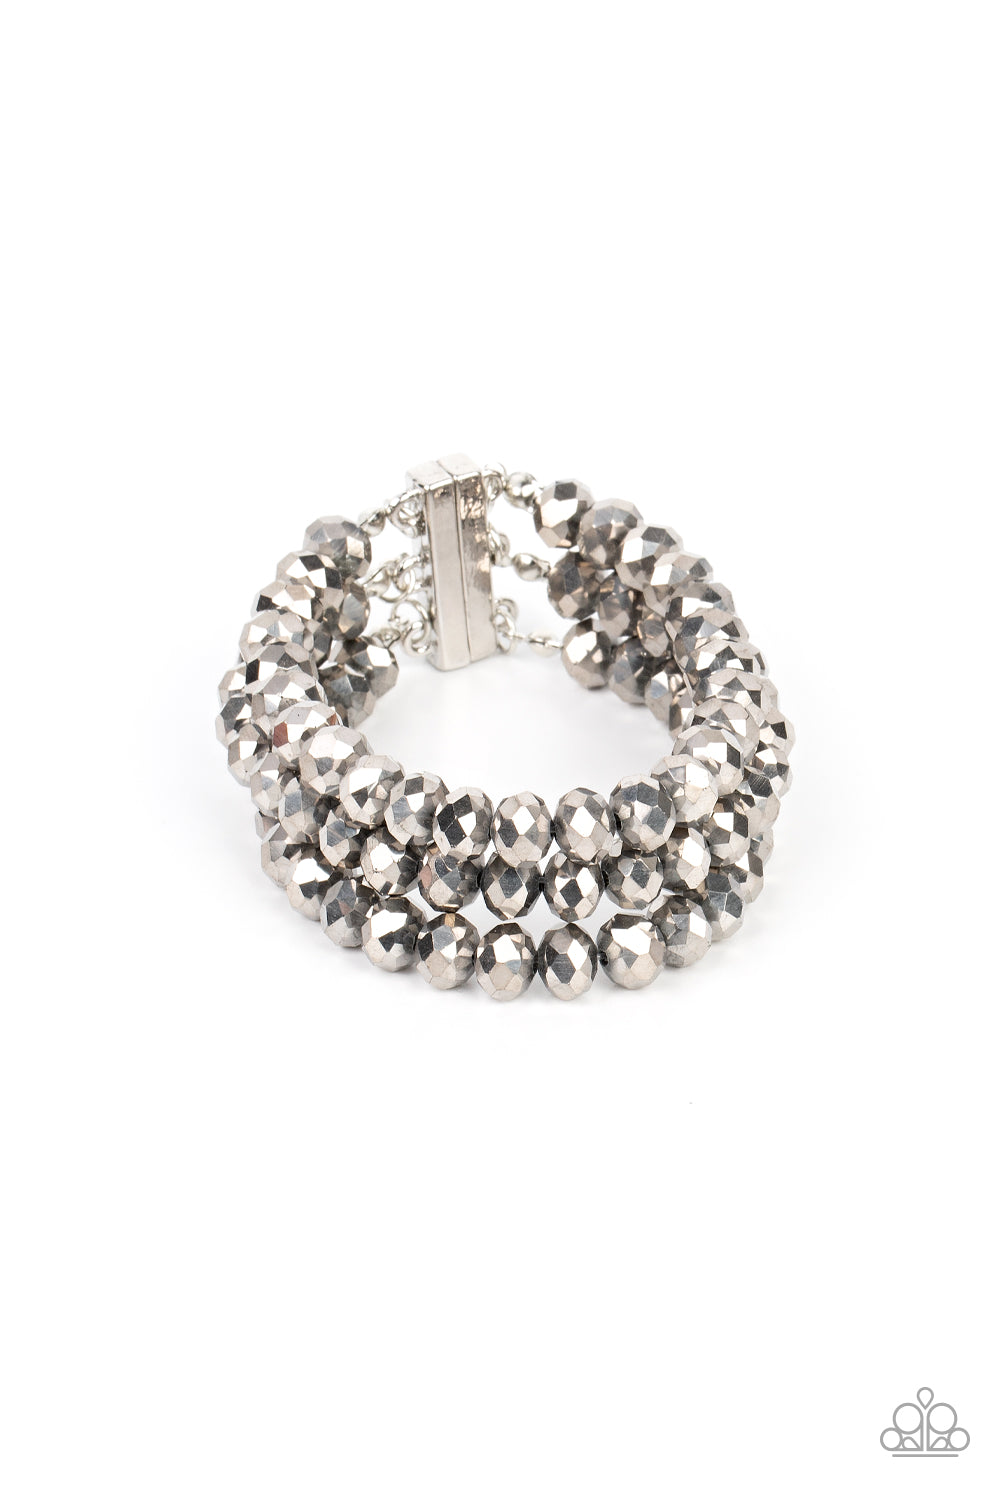 five-dollar-jewelry-supernova-sultry-silver-bracelet-paparazzi-accessories